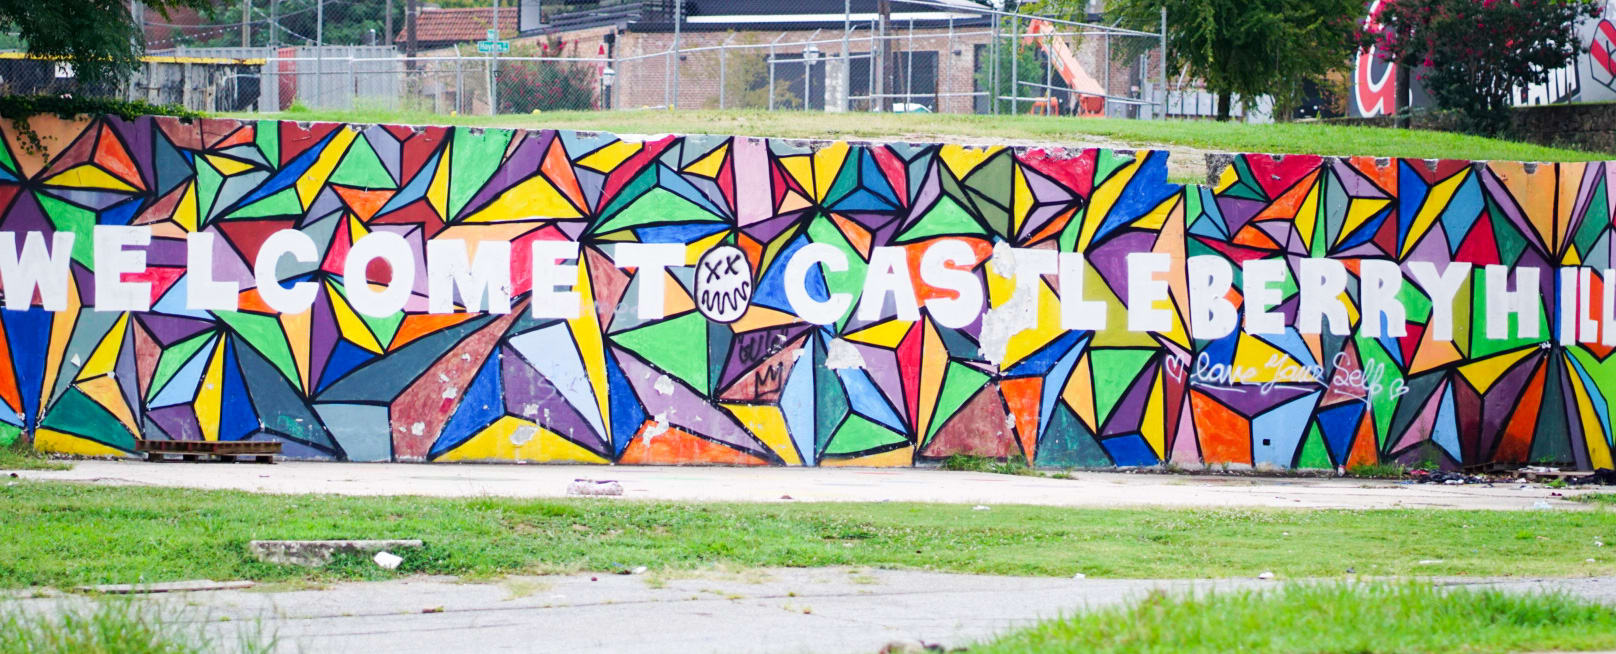 Castleberry Hill puts the art in heart